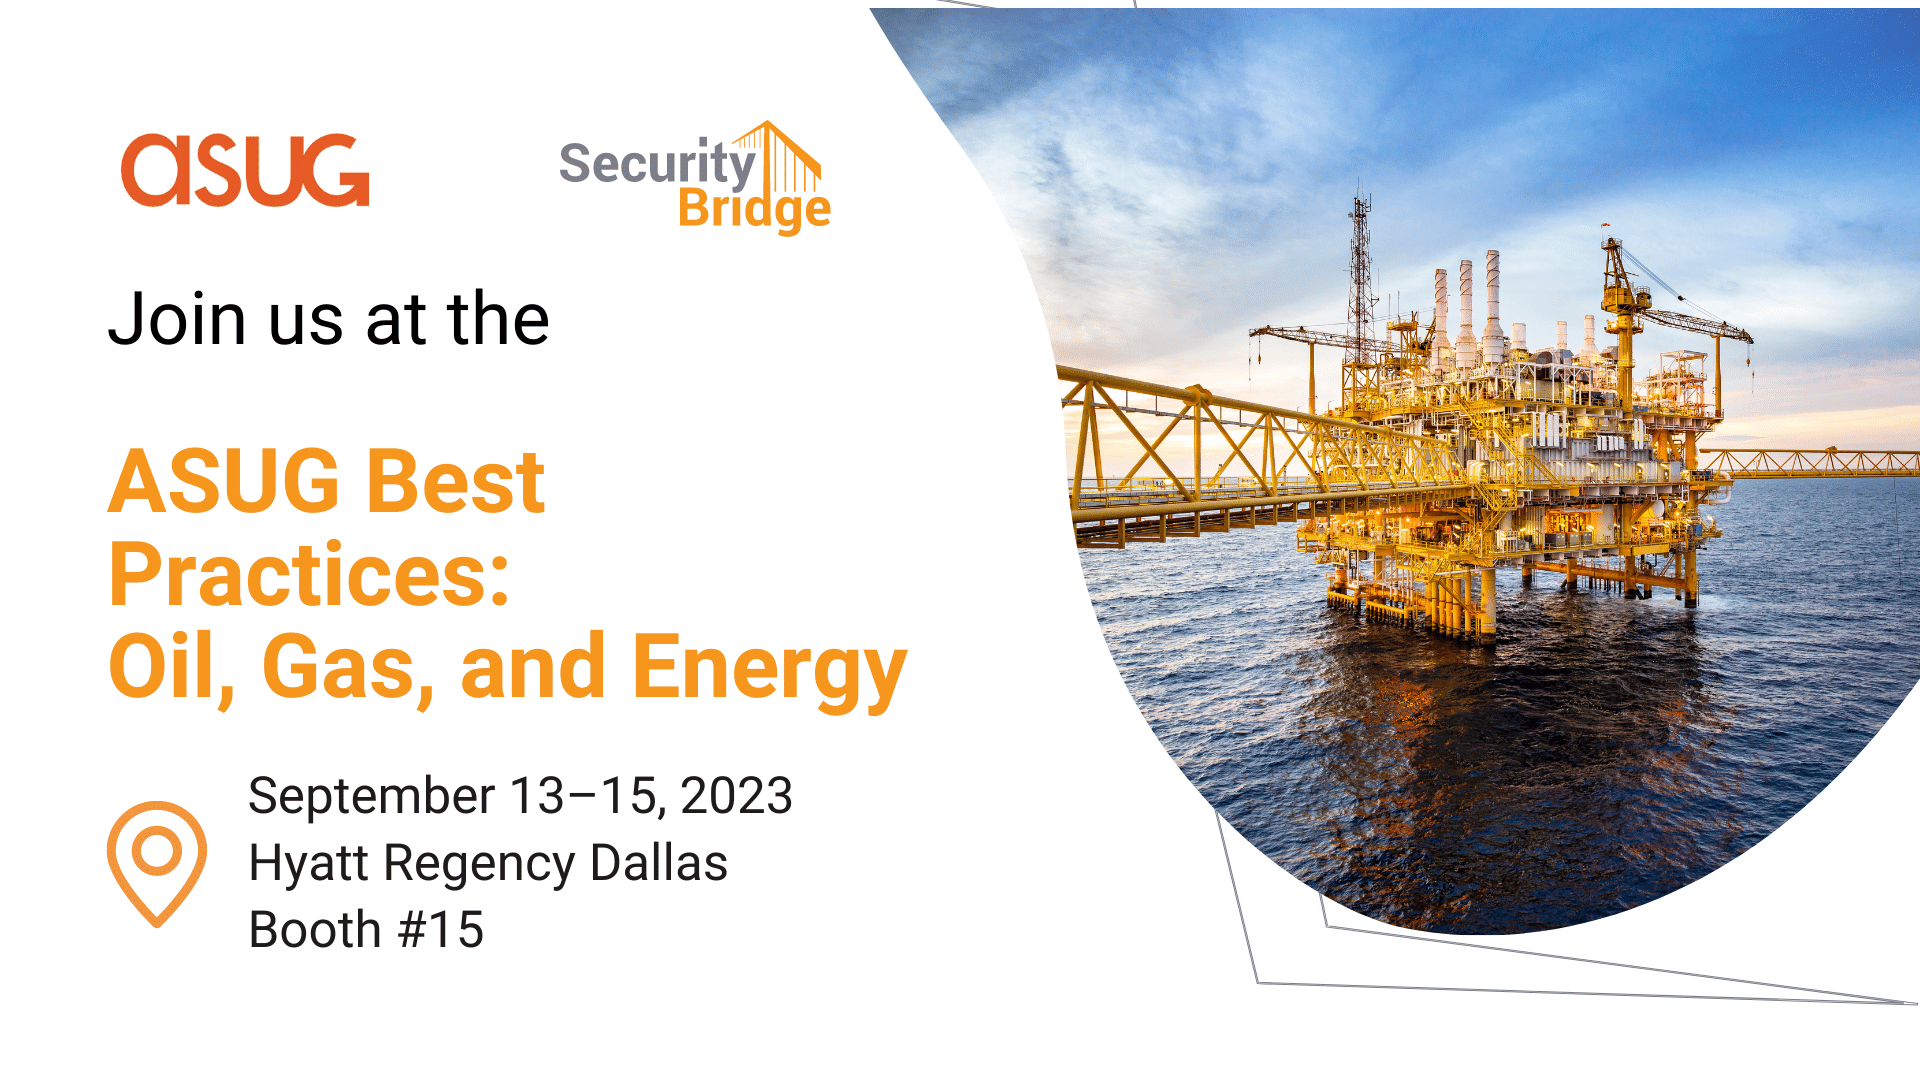 ASUG Best Practices: Oil, Gas, and Energy